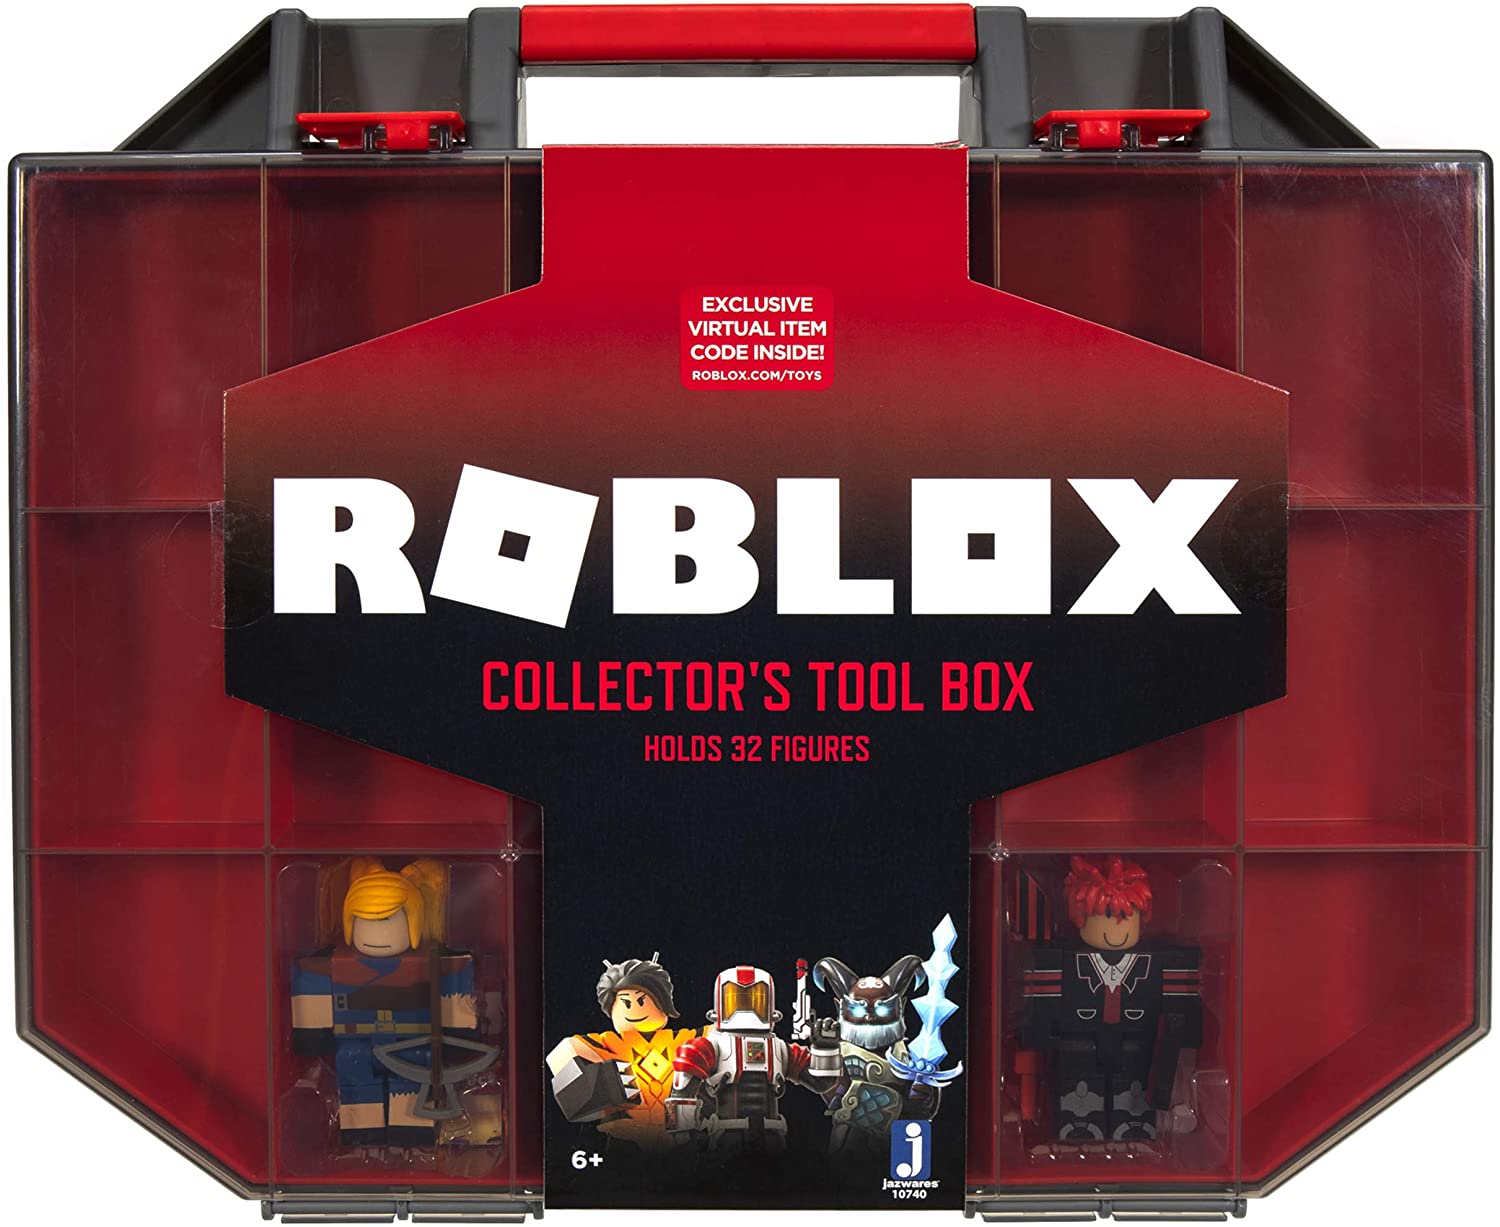 Roblox Collector's Tool Box